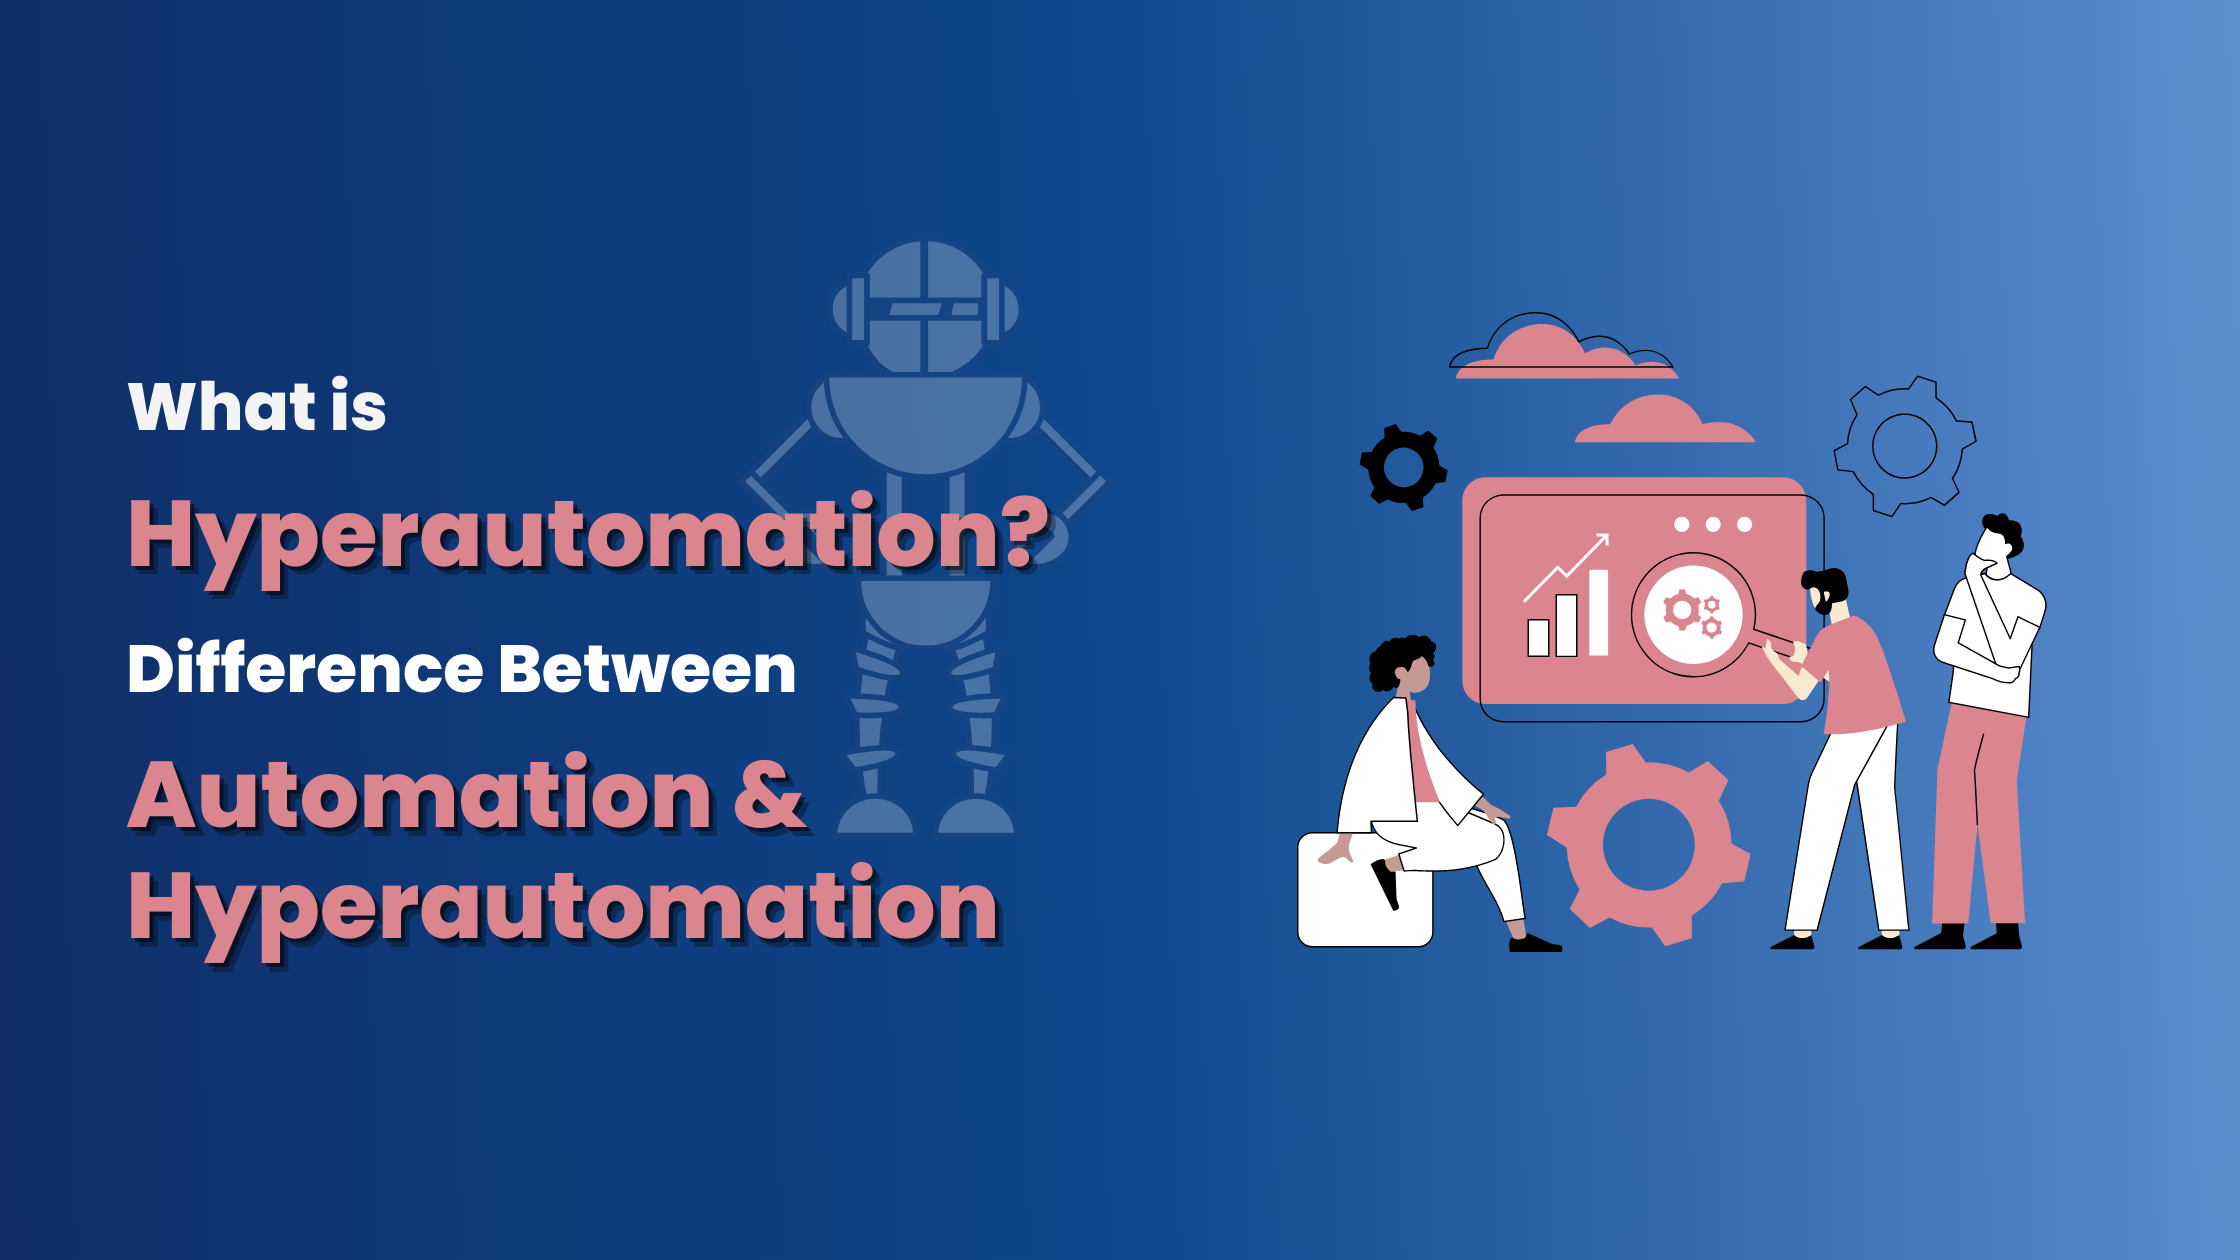 What is Hyper Automation? Difference Between Automation and Hyper Automation